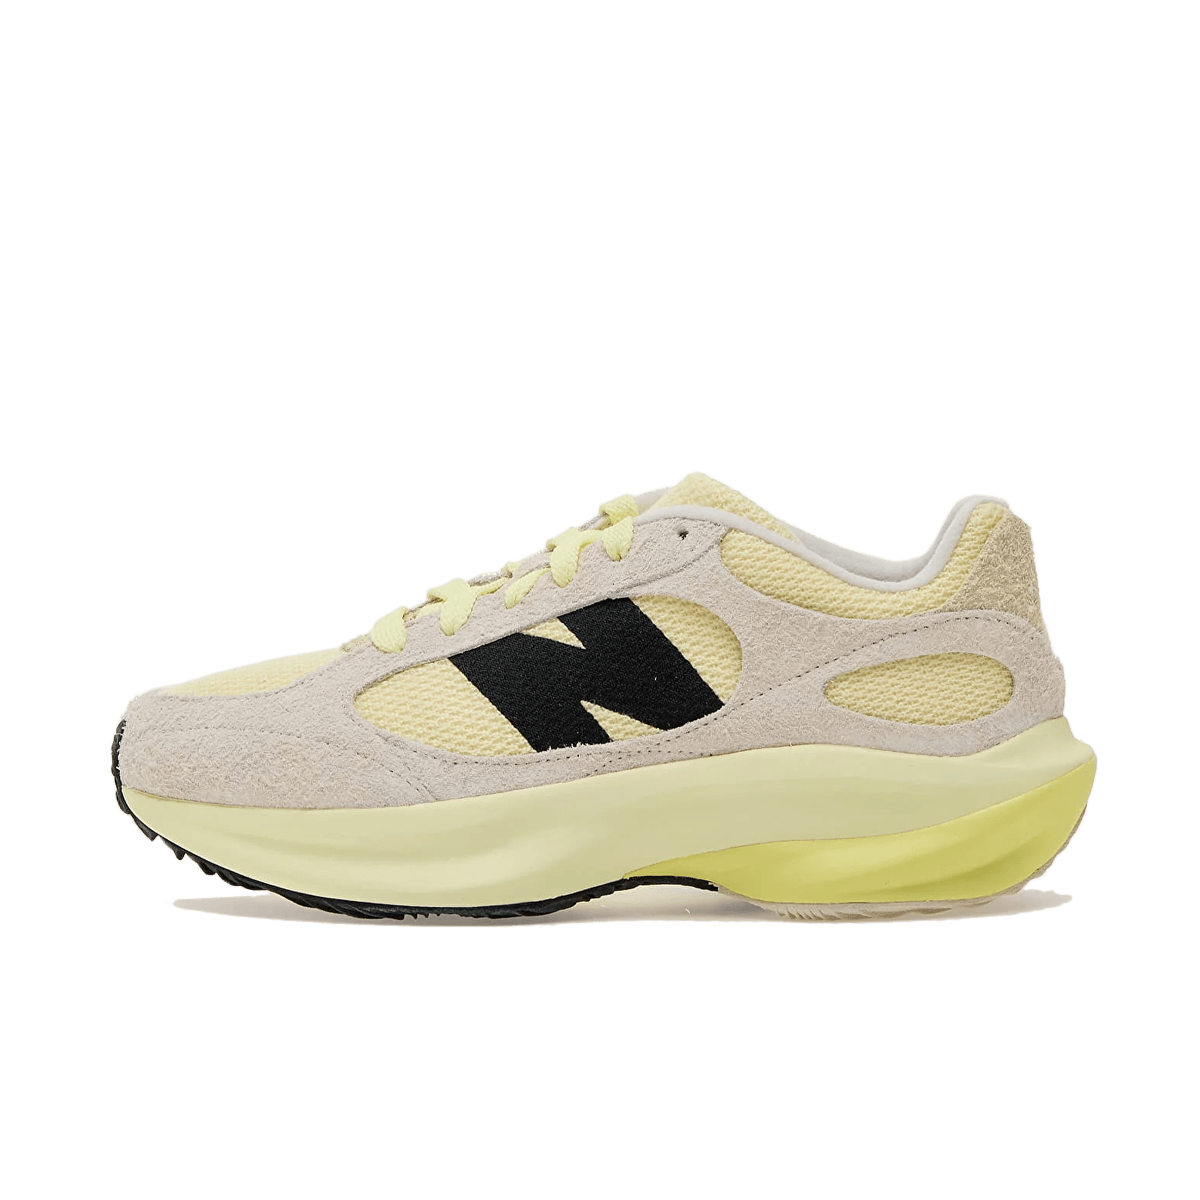 New Balance WRPD Runner 'Electric Yellow' - Pastel Pack